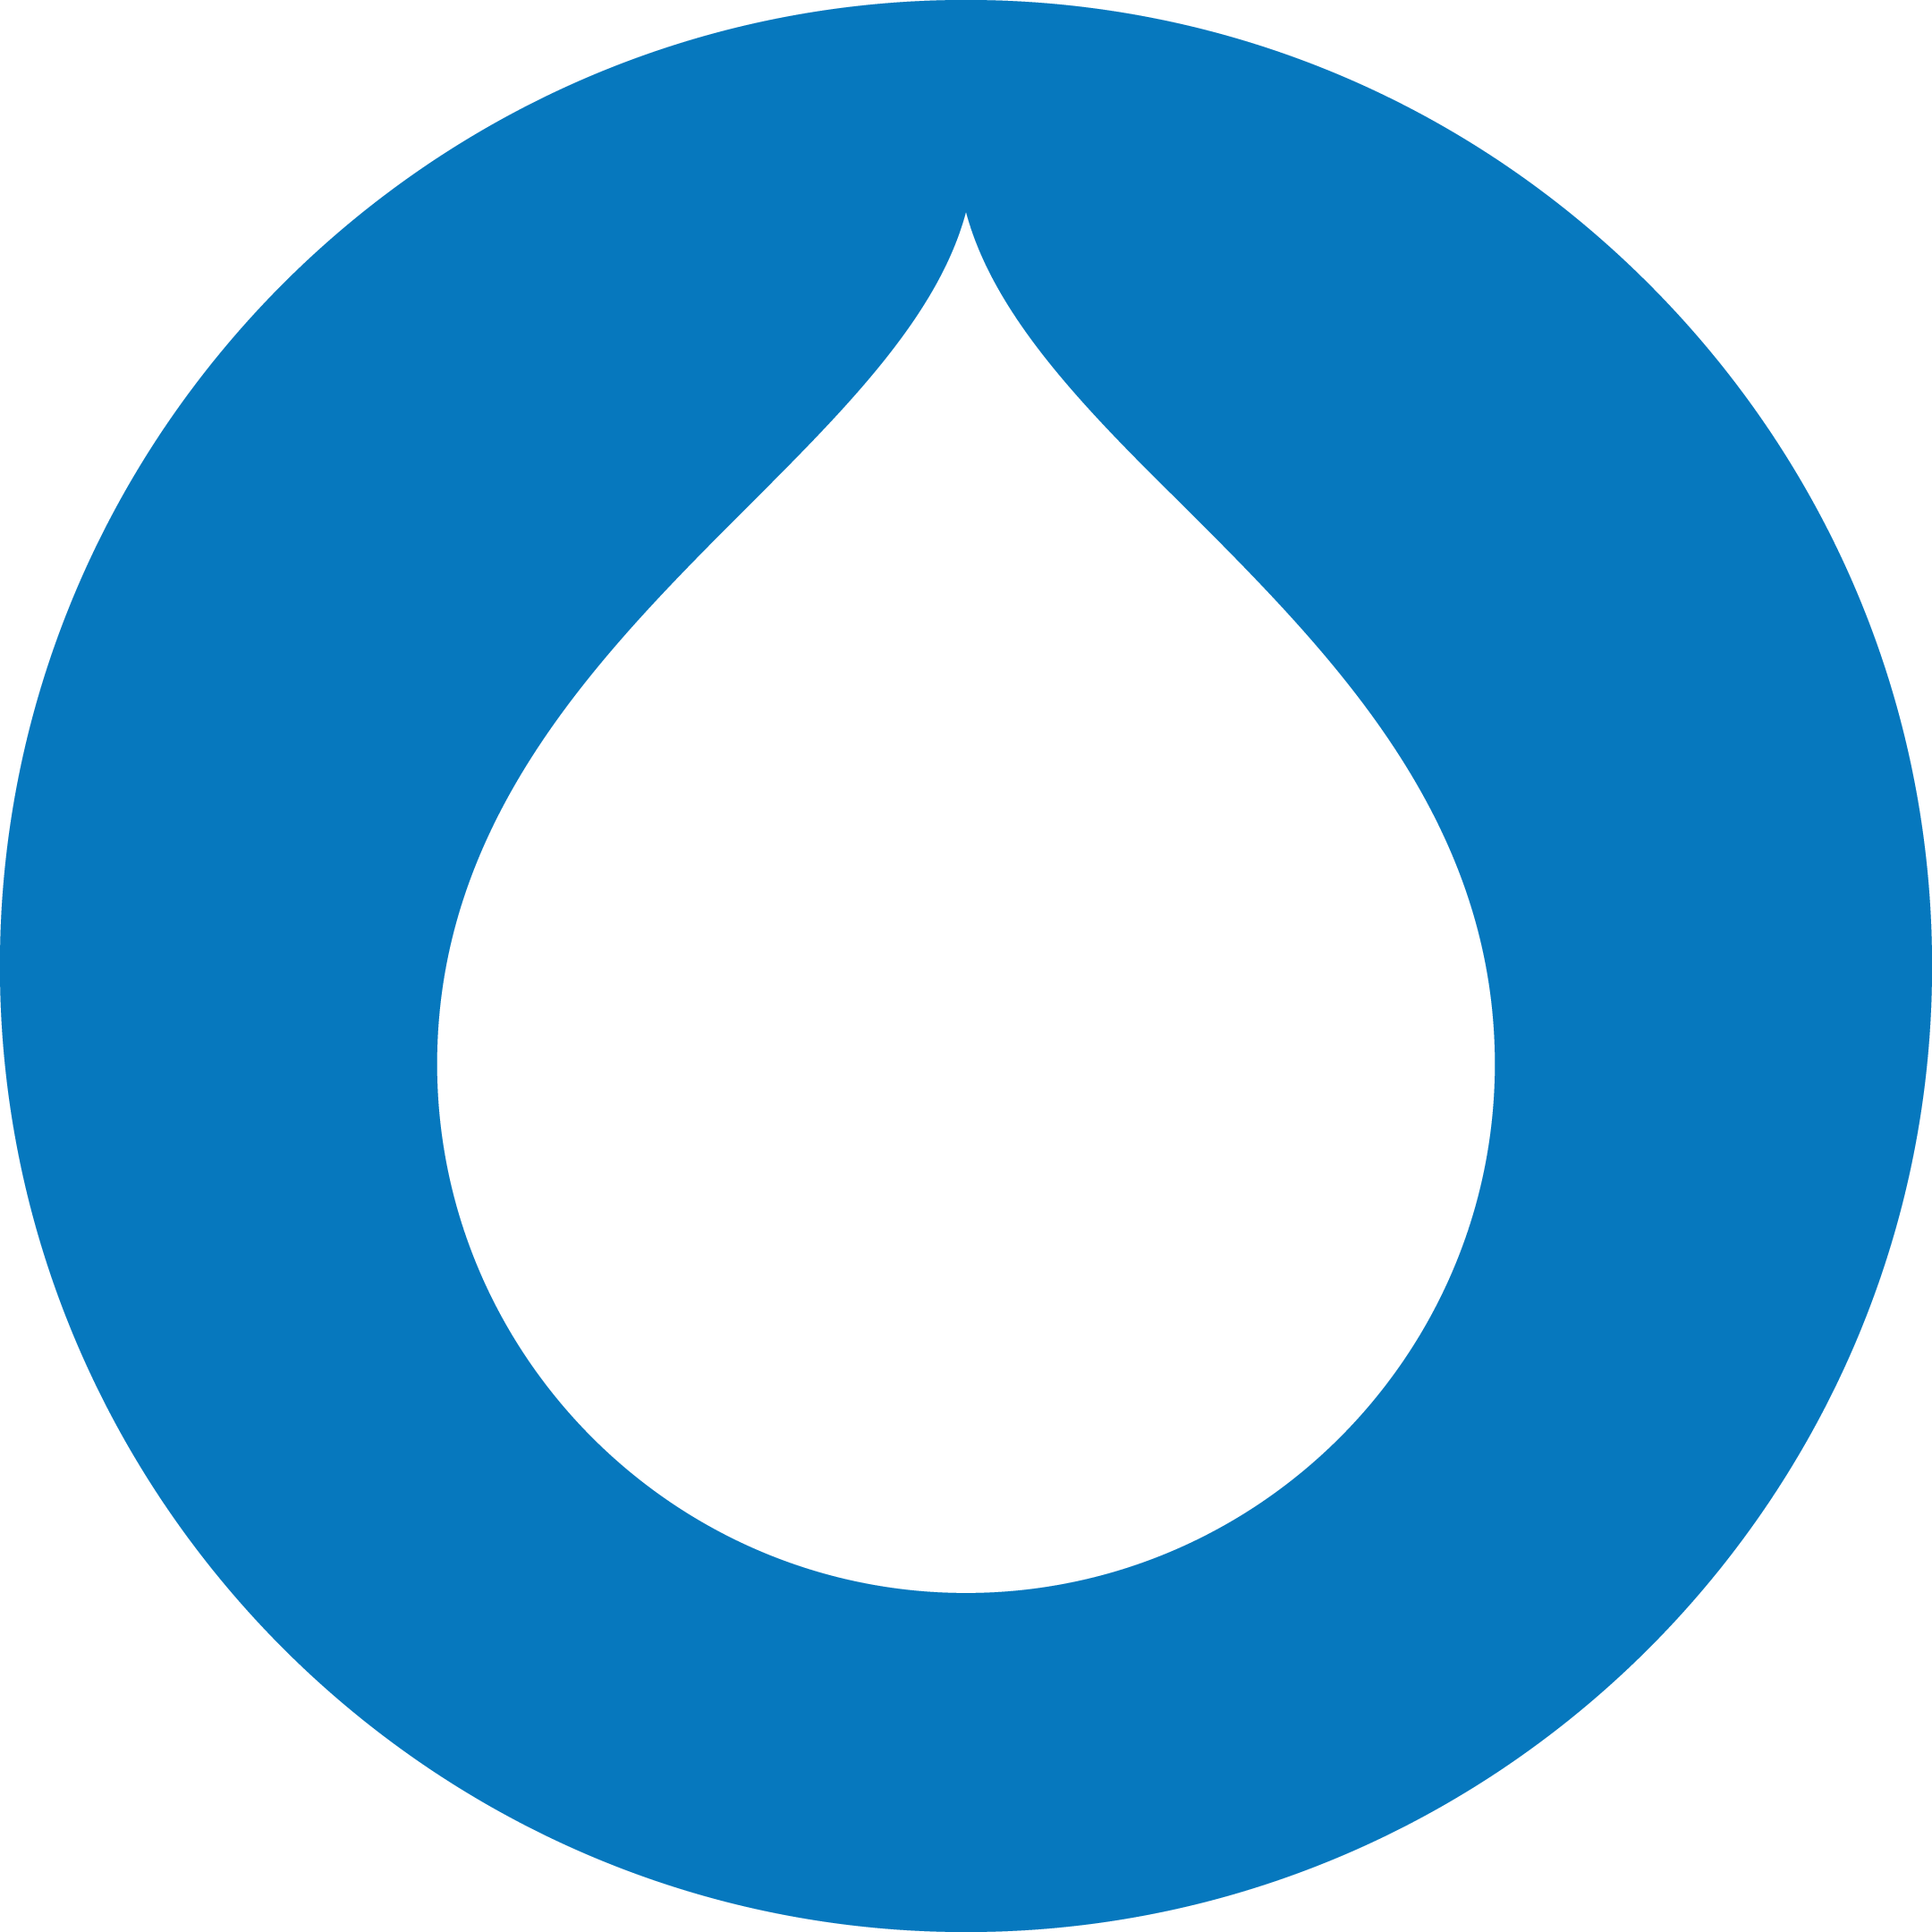 Drupal Logo - Twitter Icon For Email Signature (2160x2160)